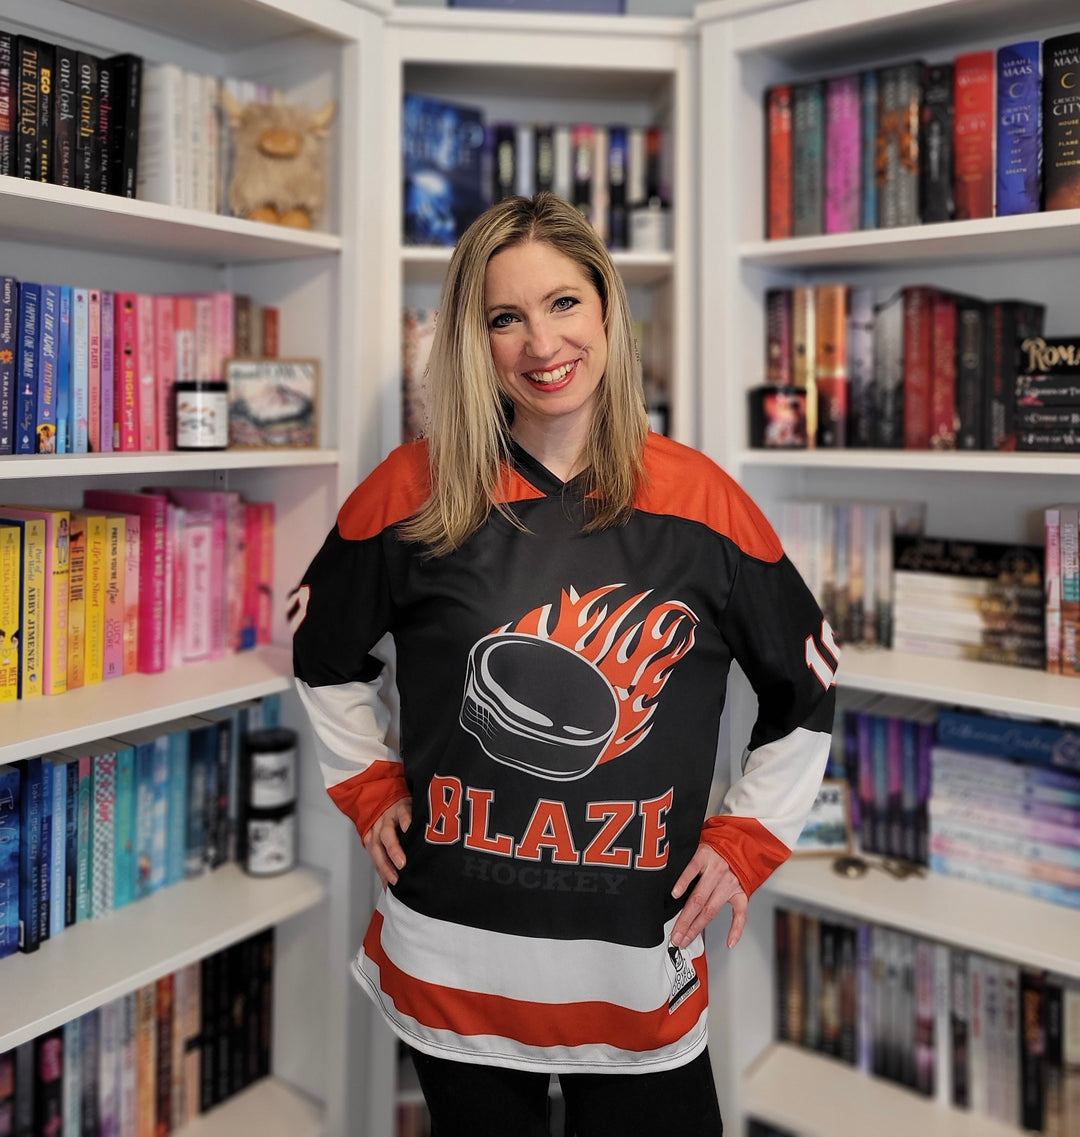 a woman standing in front of a book shelf holding a hockey jersey